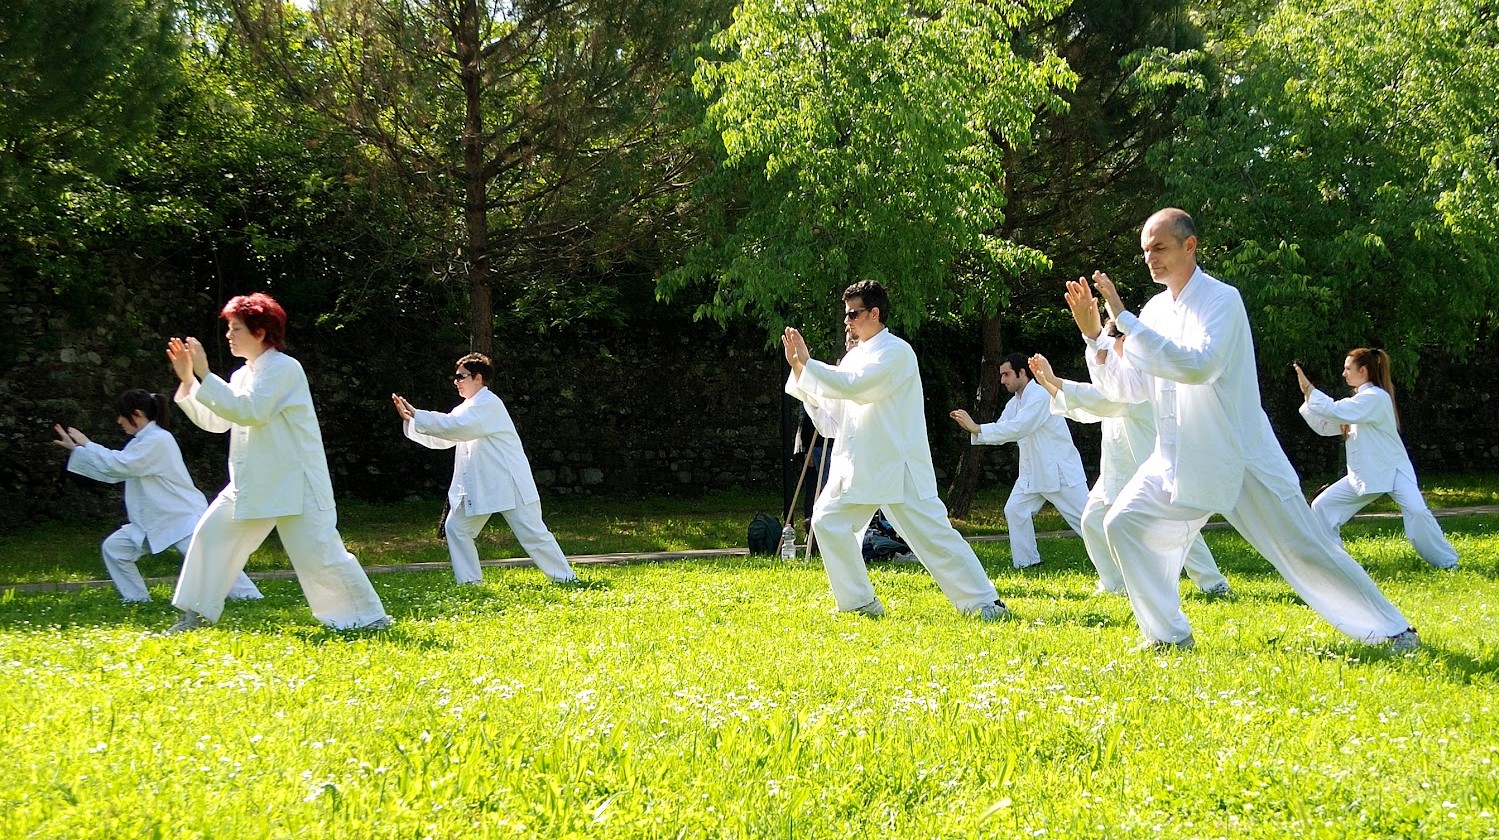 Chi kung practice in group